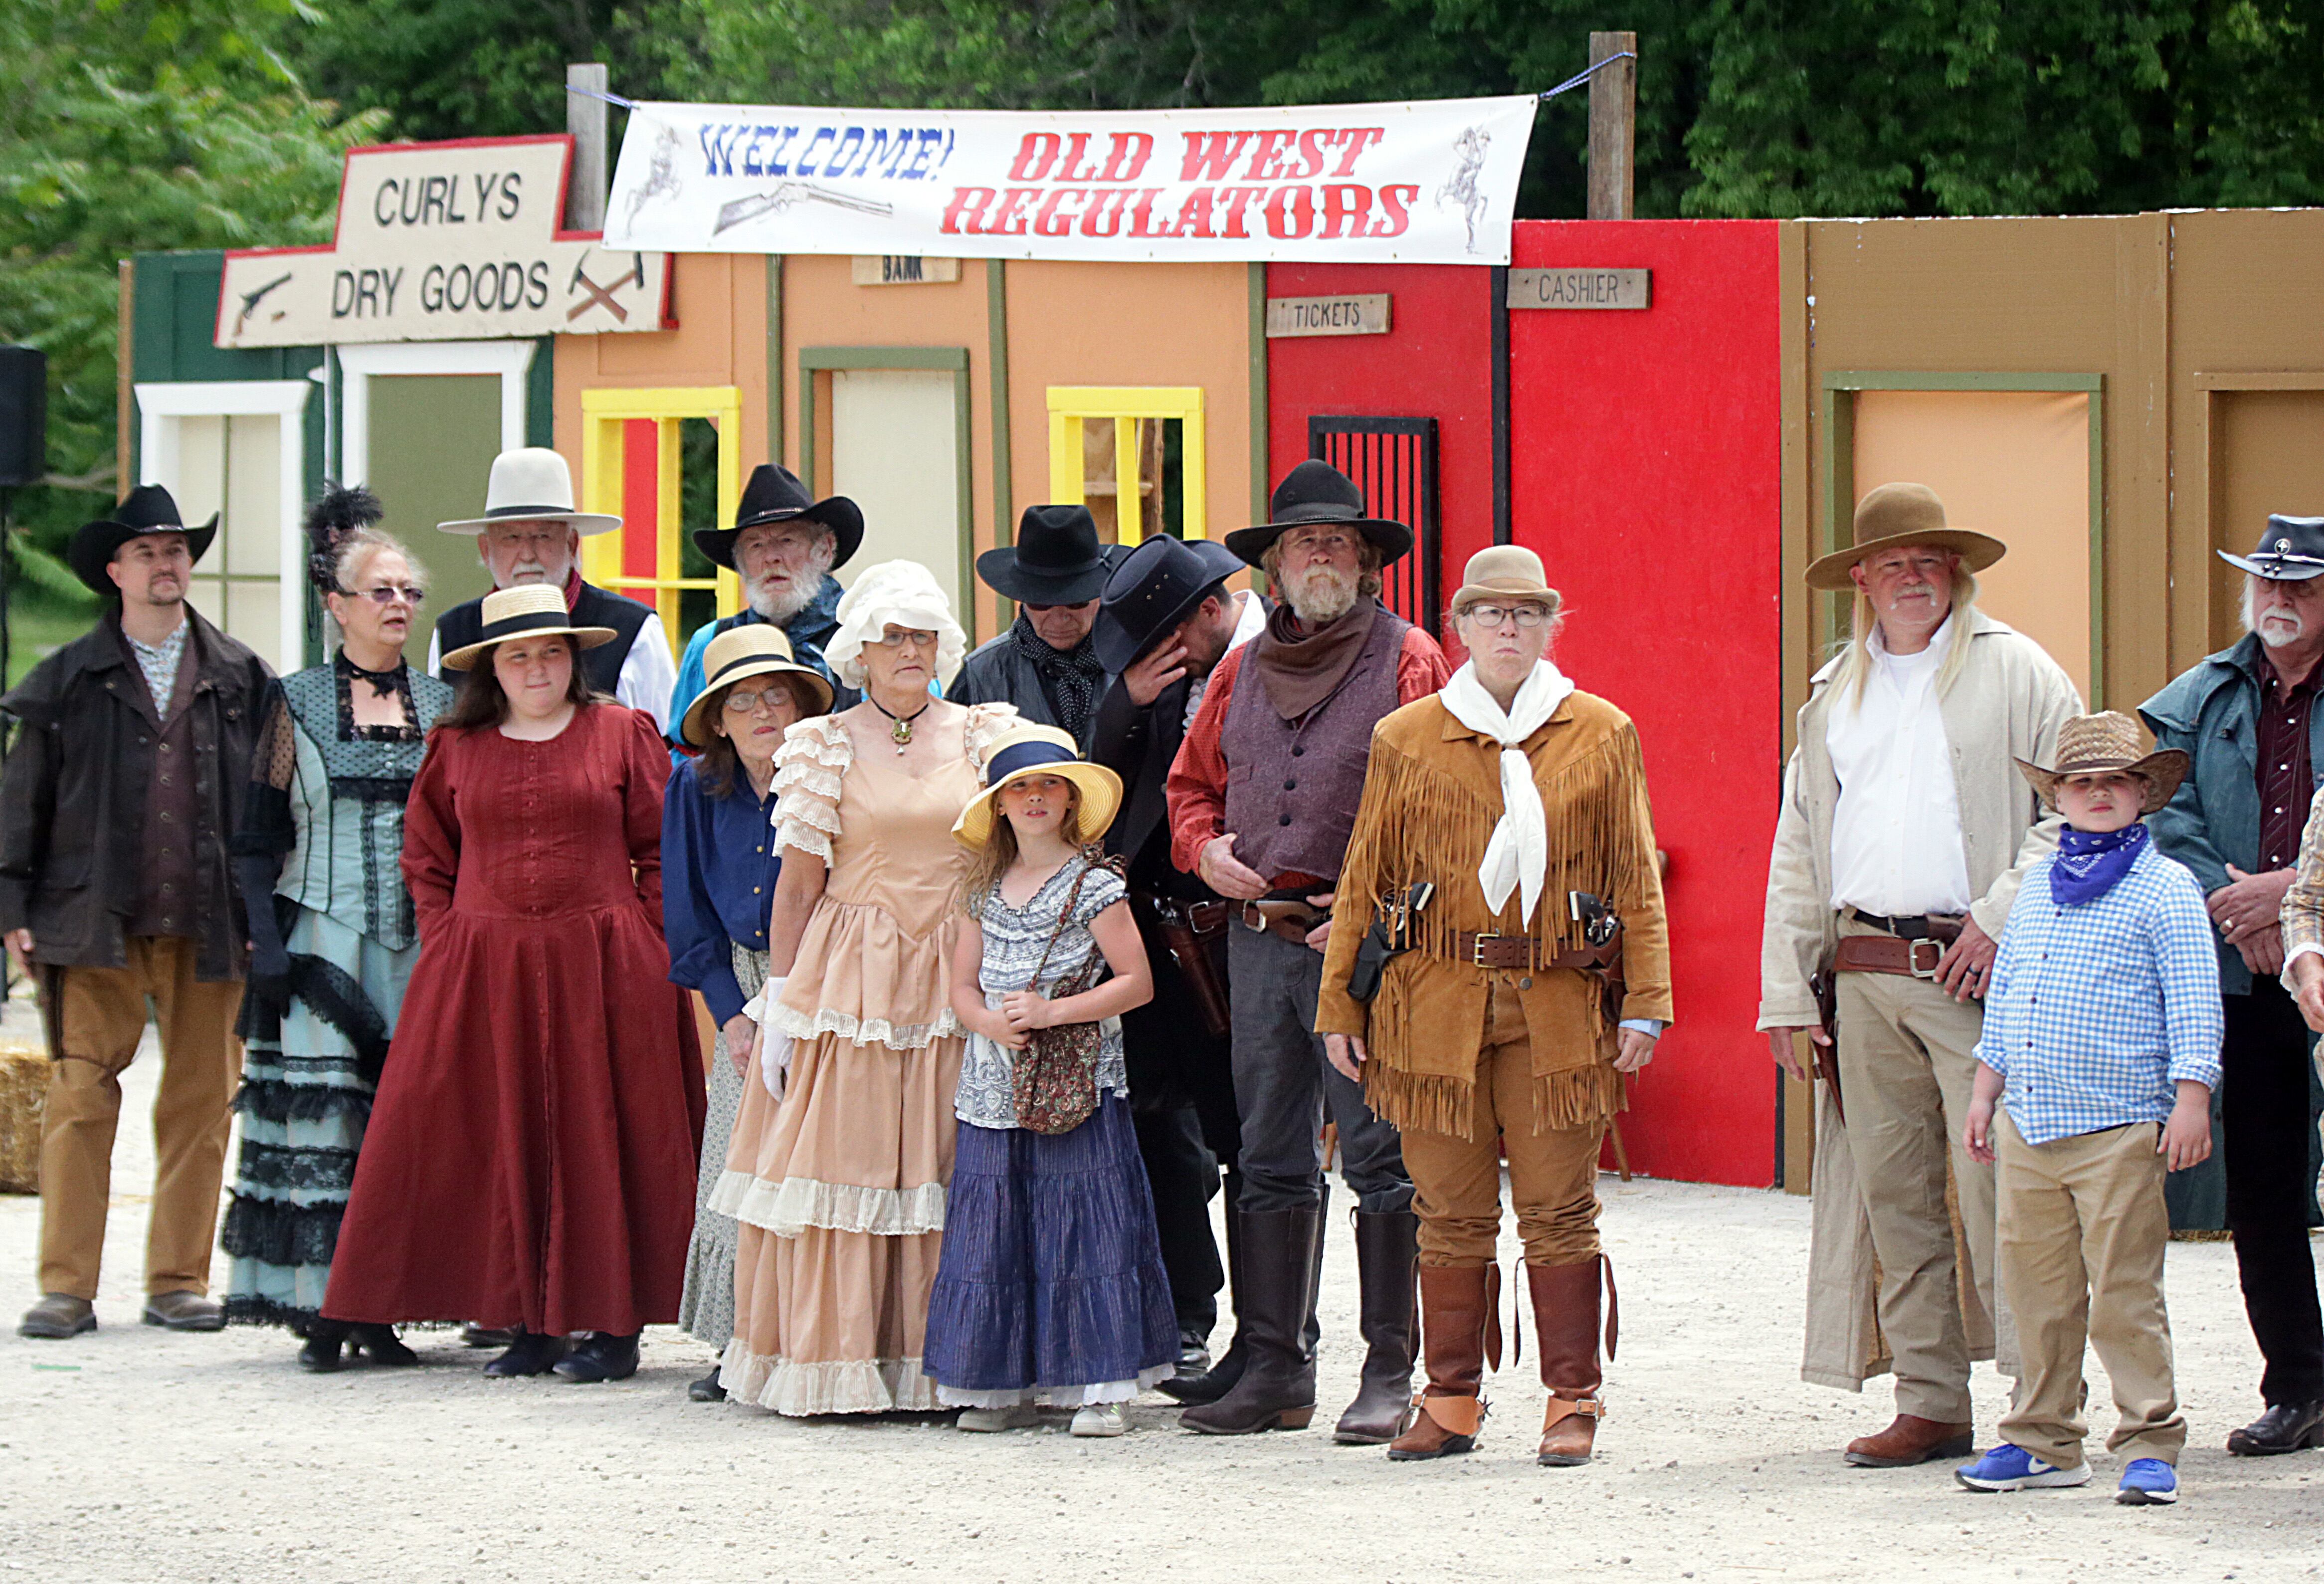 The Old West Regulators pose for a photo before acting at the Wild Bill Days event at the La Salle County Historical Society in Utica.